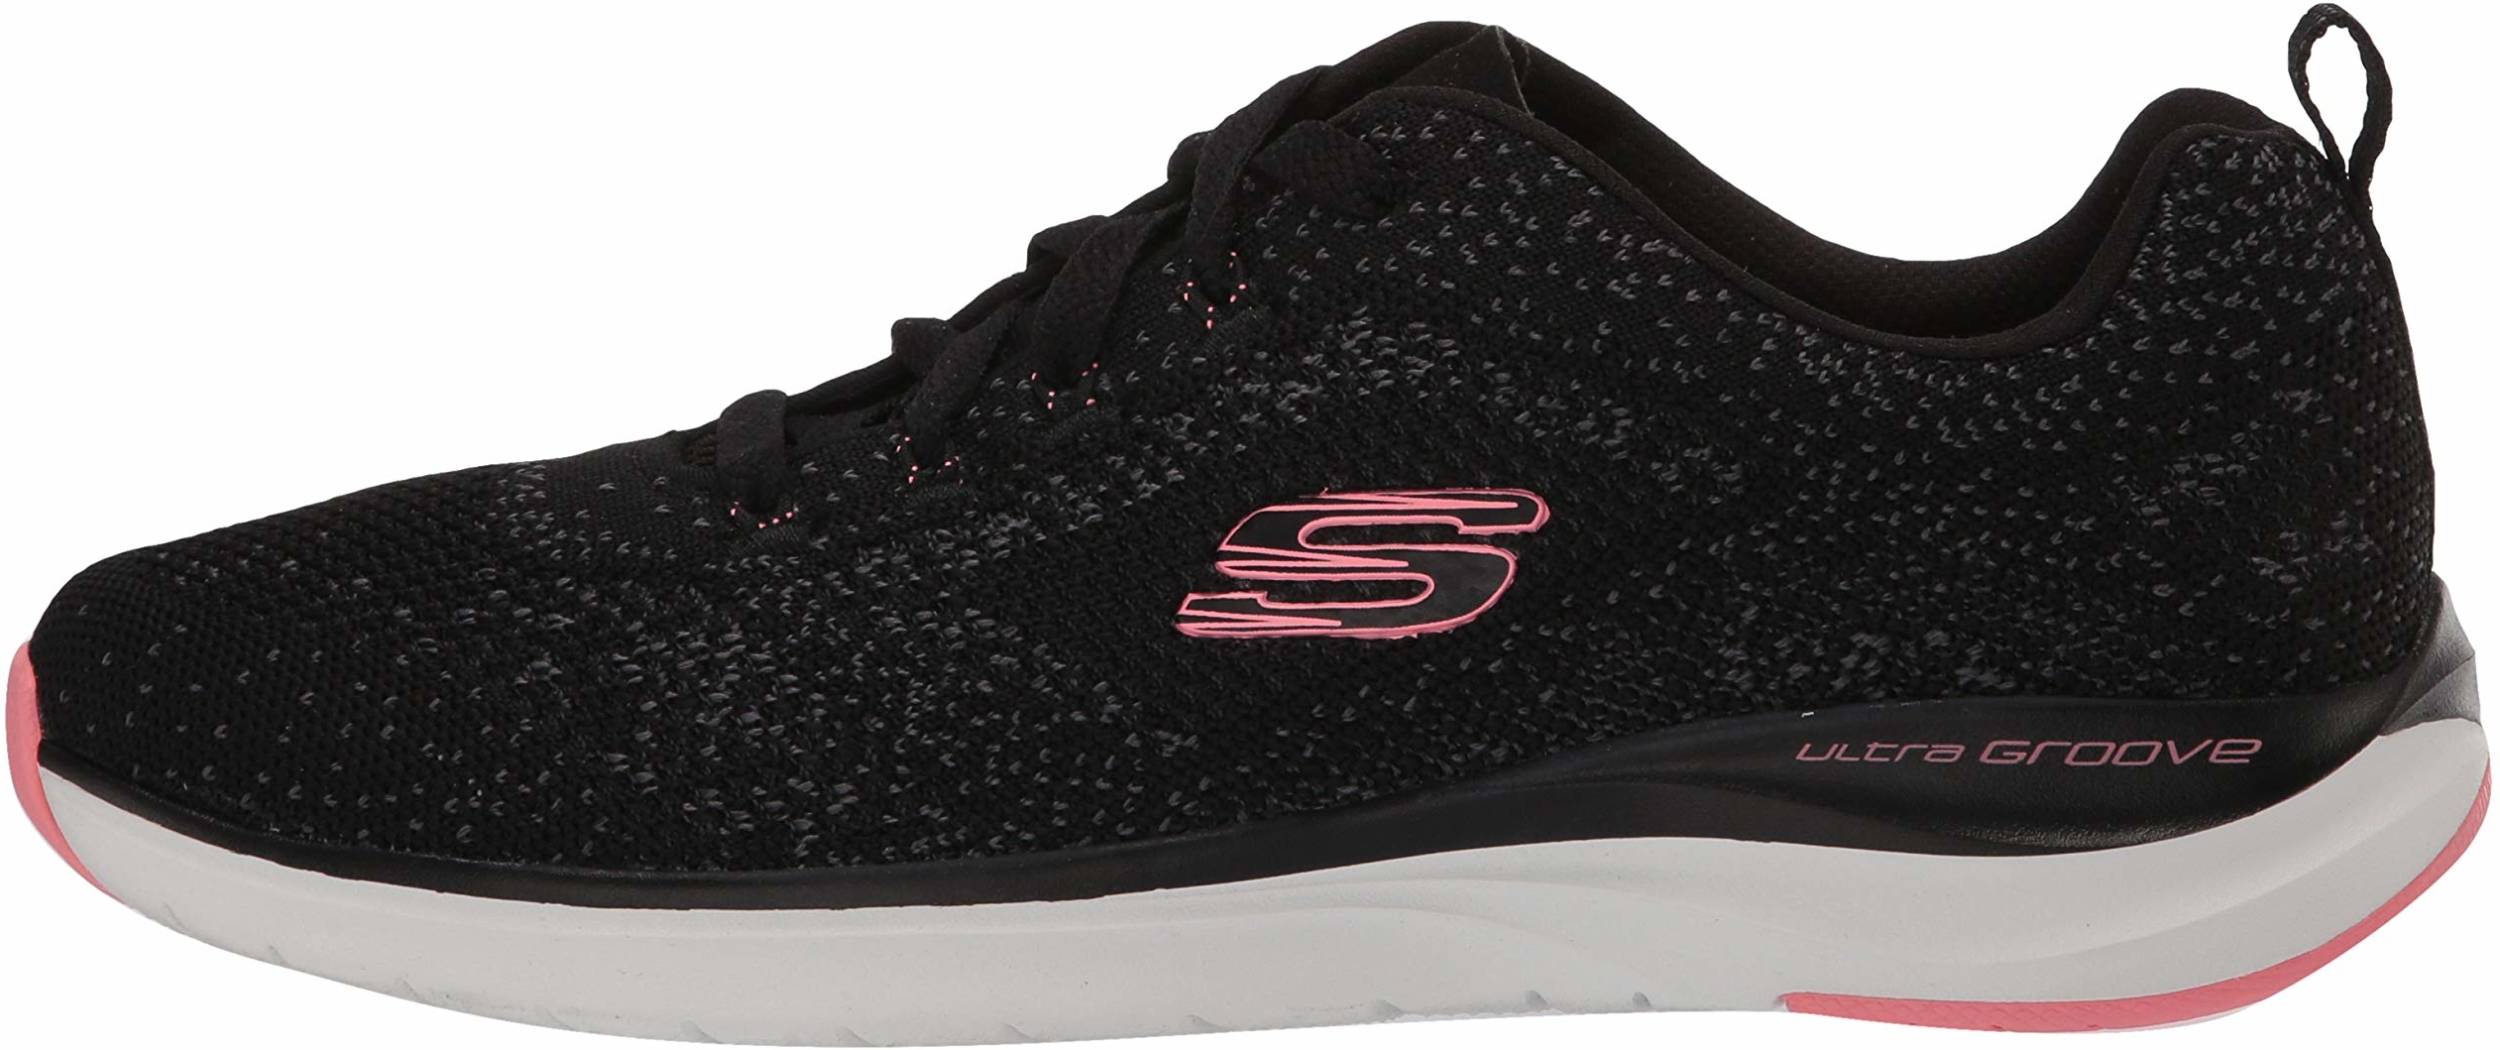 Review of Skechers Ultra Groove 